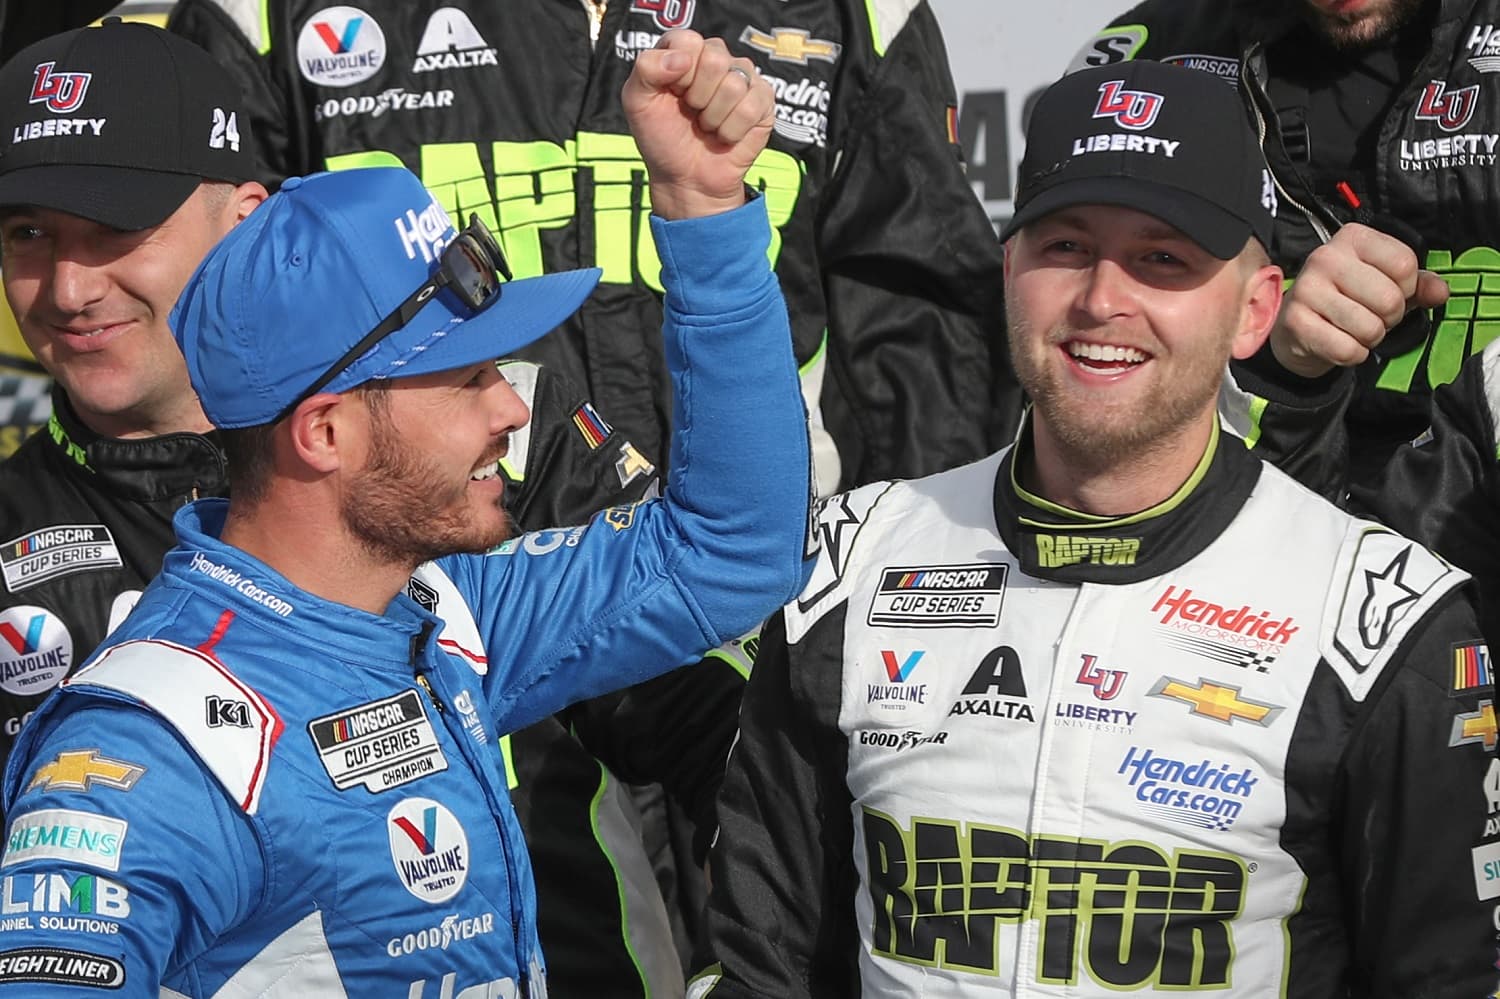 William Byron, right, is congratulated by Kyle Larson in Victory Lane after winning the NASCAR Cup Series Pennzoil 400 at Las Vegas Motor Speedway on March 5, 2023.